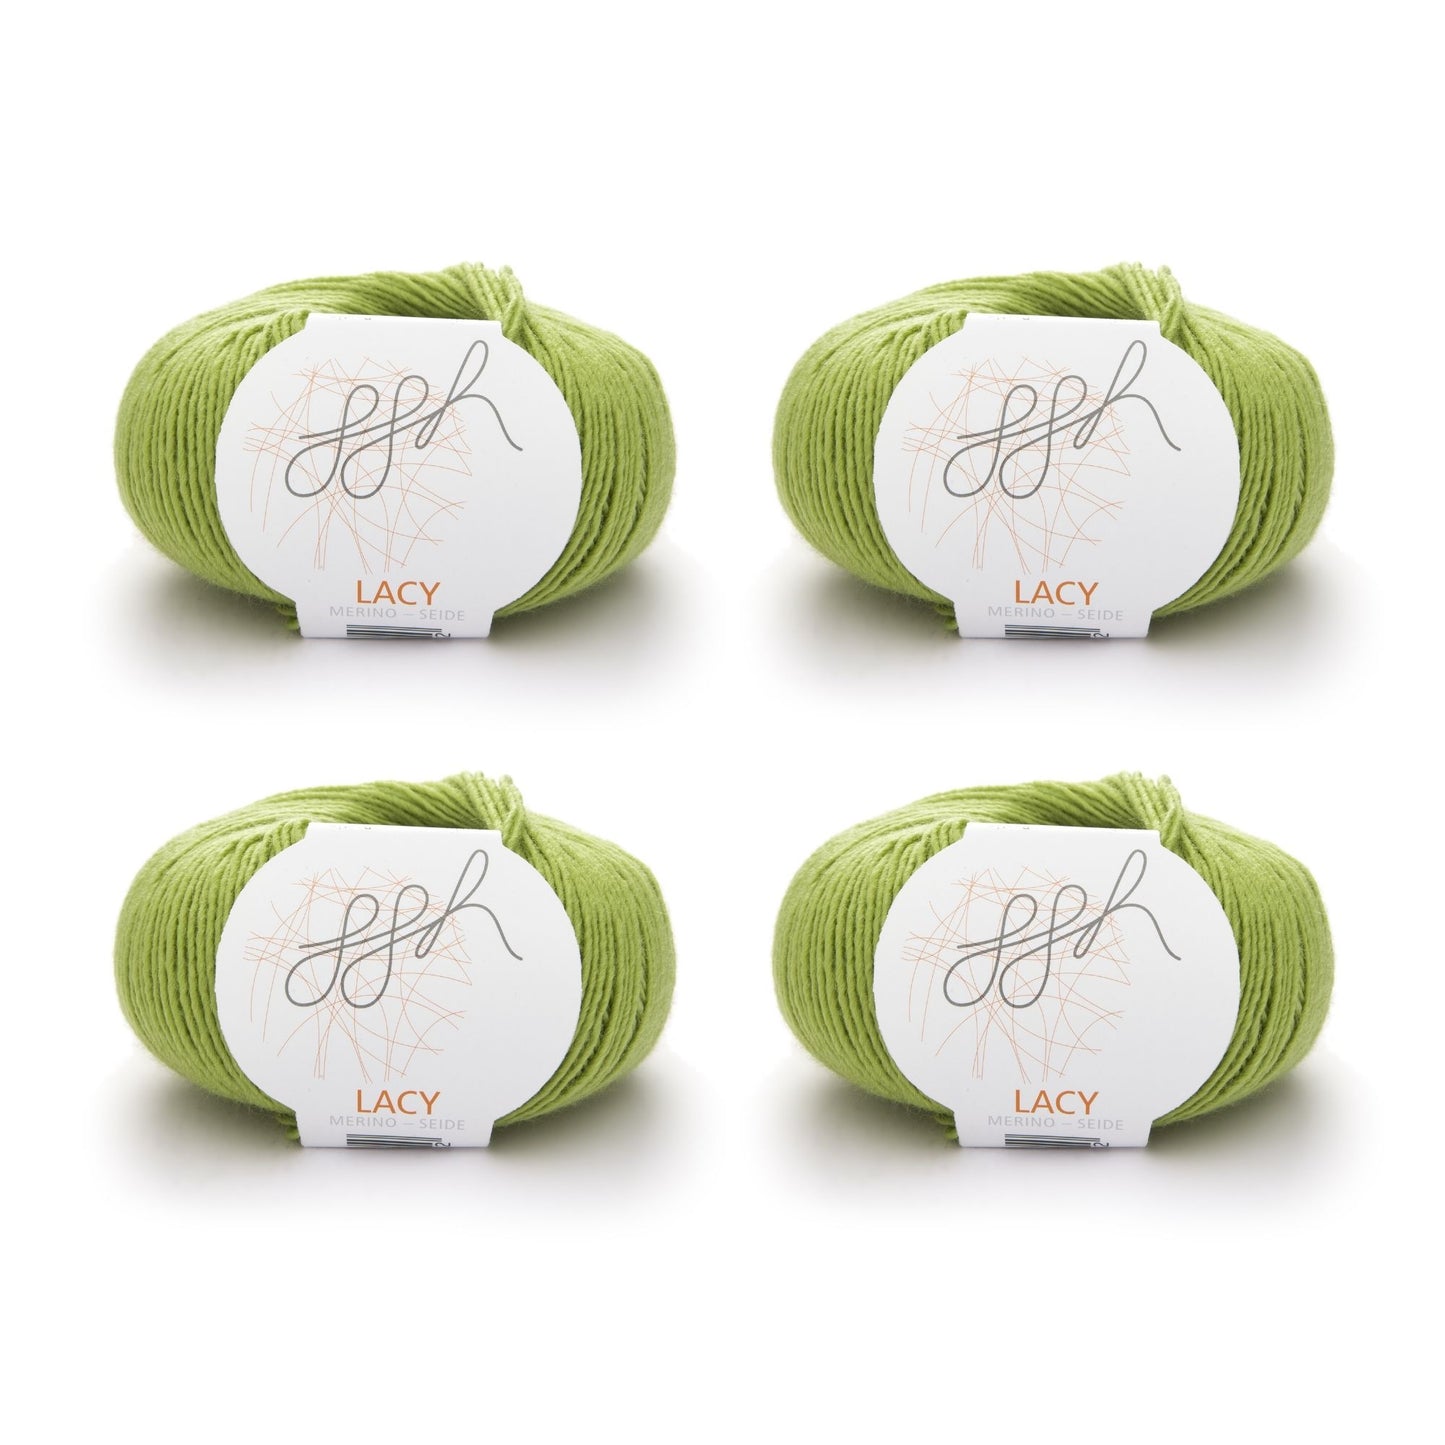 ggh Lacy | Set of 4 x 25g (total 100g) - 006 - Apple Green